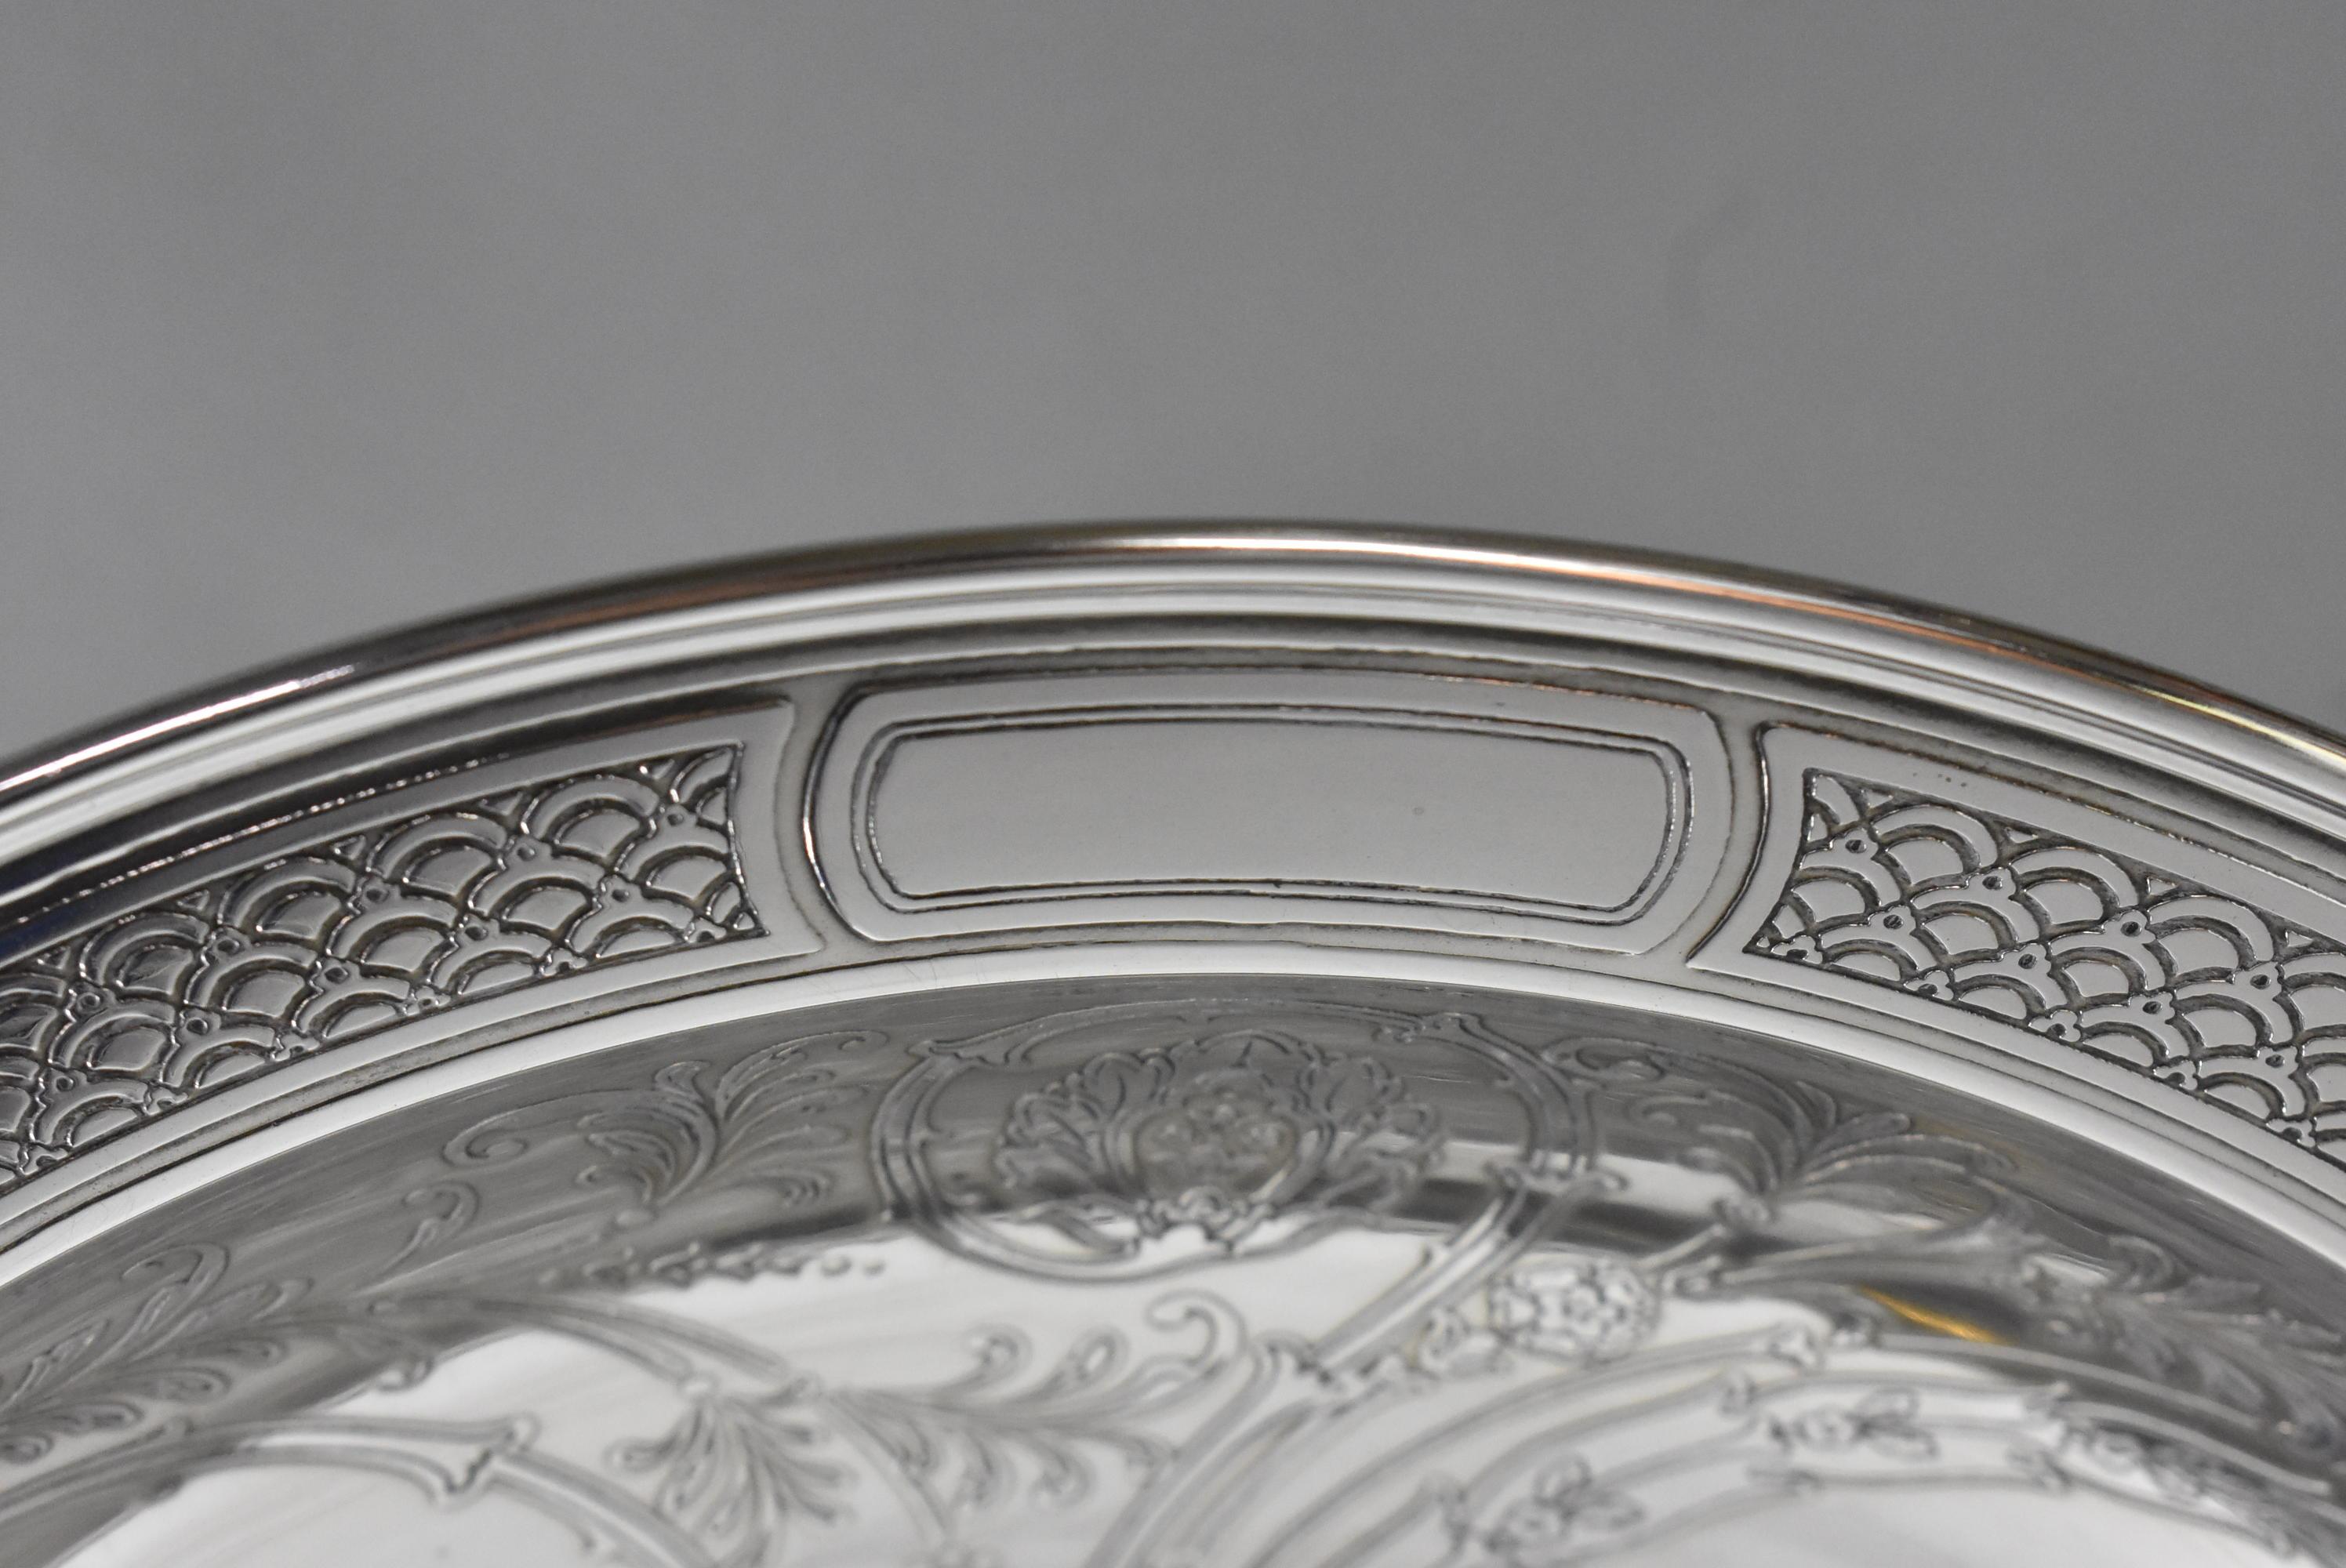 Etched Aesthetic Tiffany & Co. Sterling Silver Bowl Bird Flowers 925-1000 18696A Makers